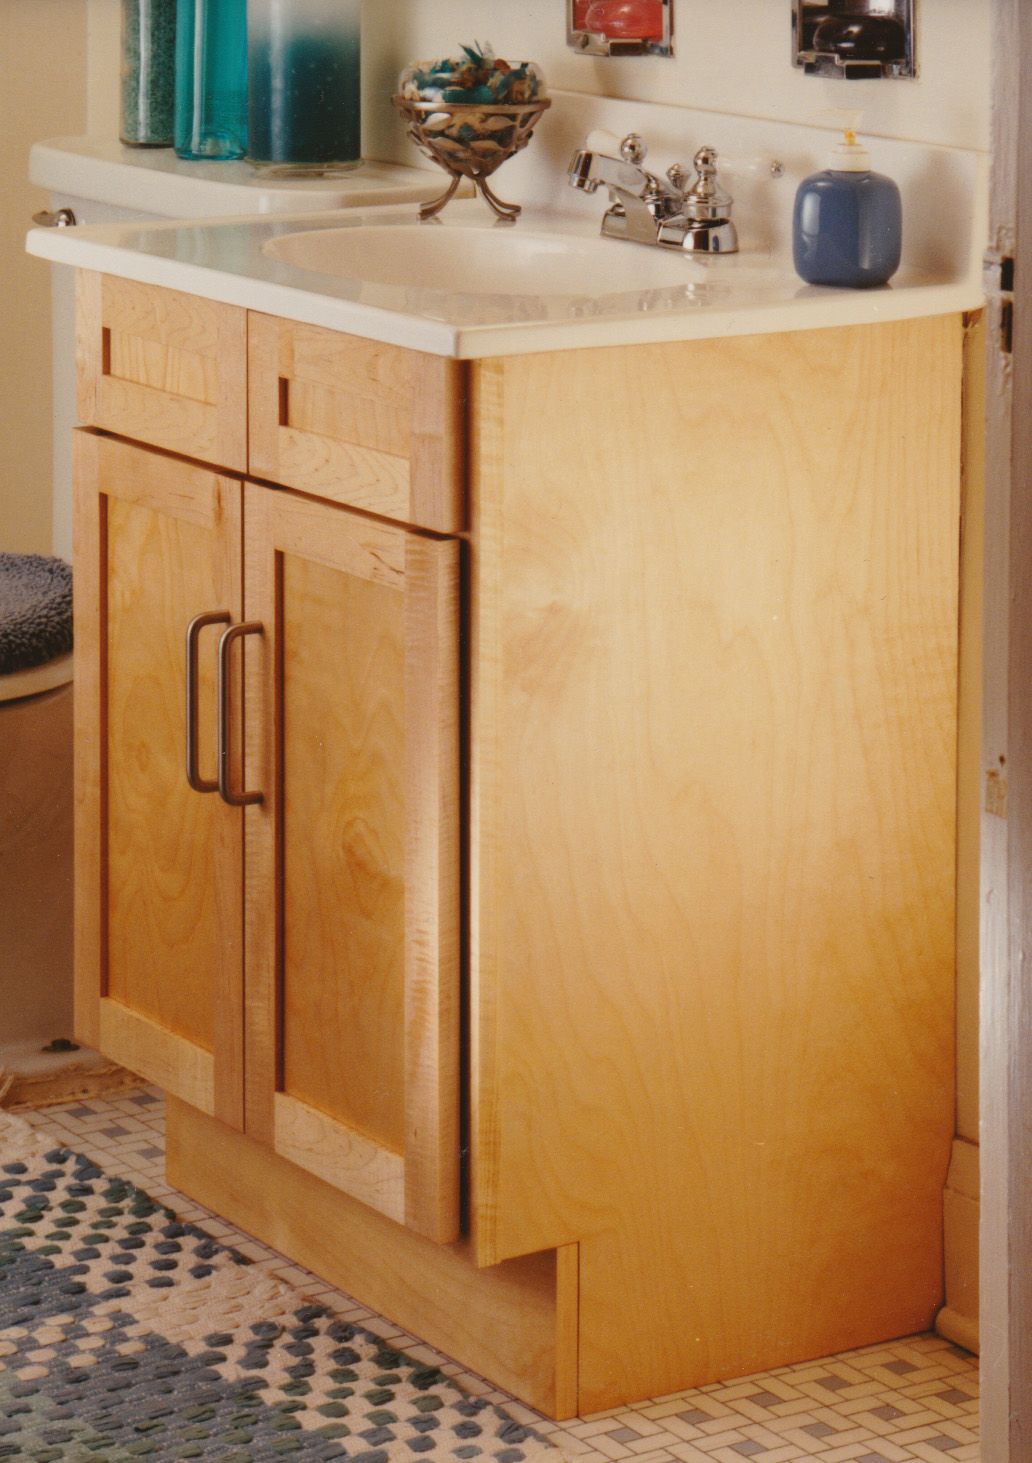 Buy A Hand Crafted Birch Maple Bathroom Vanity Made To Order